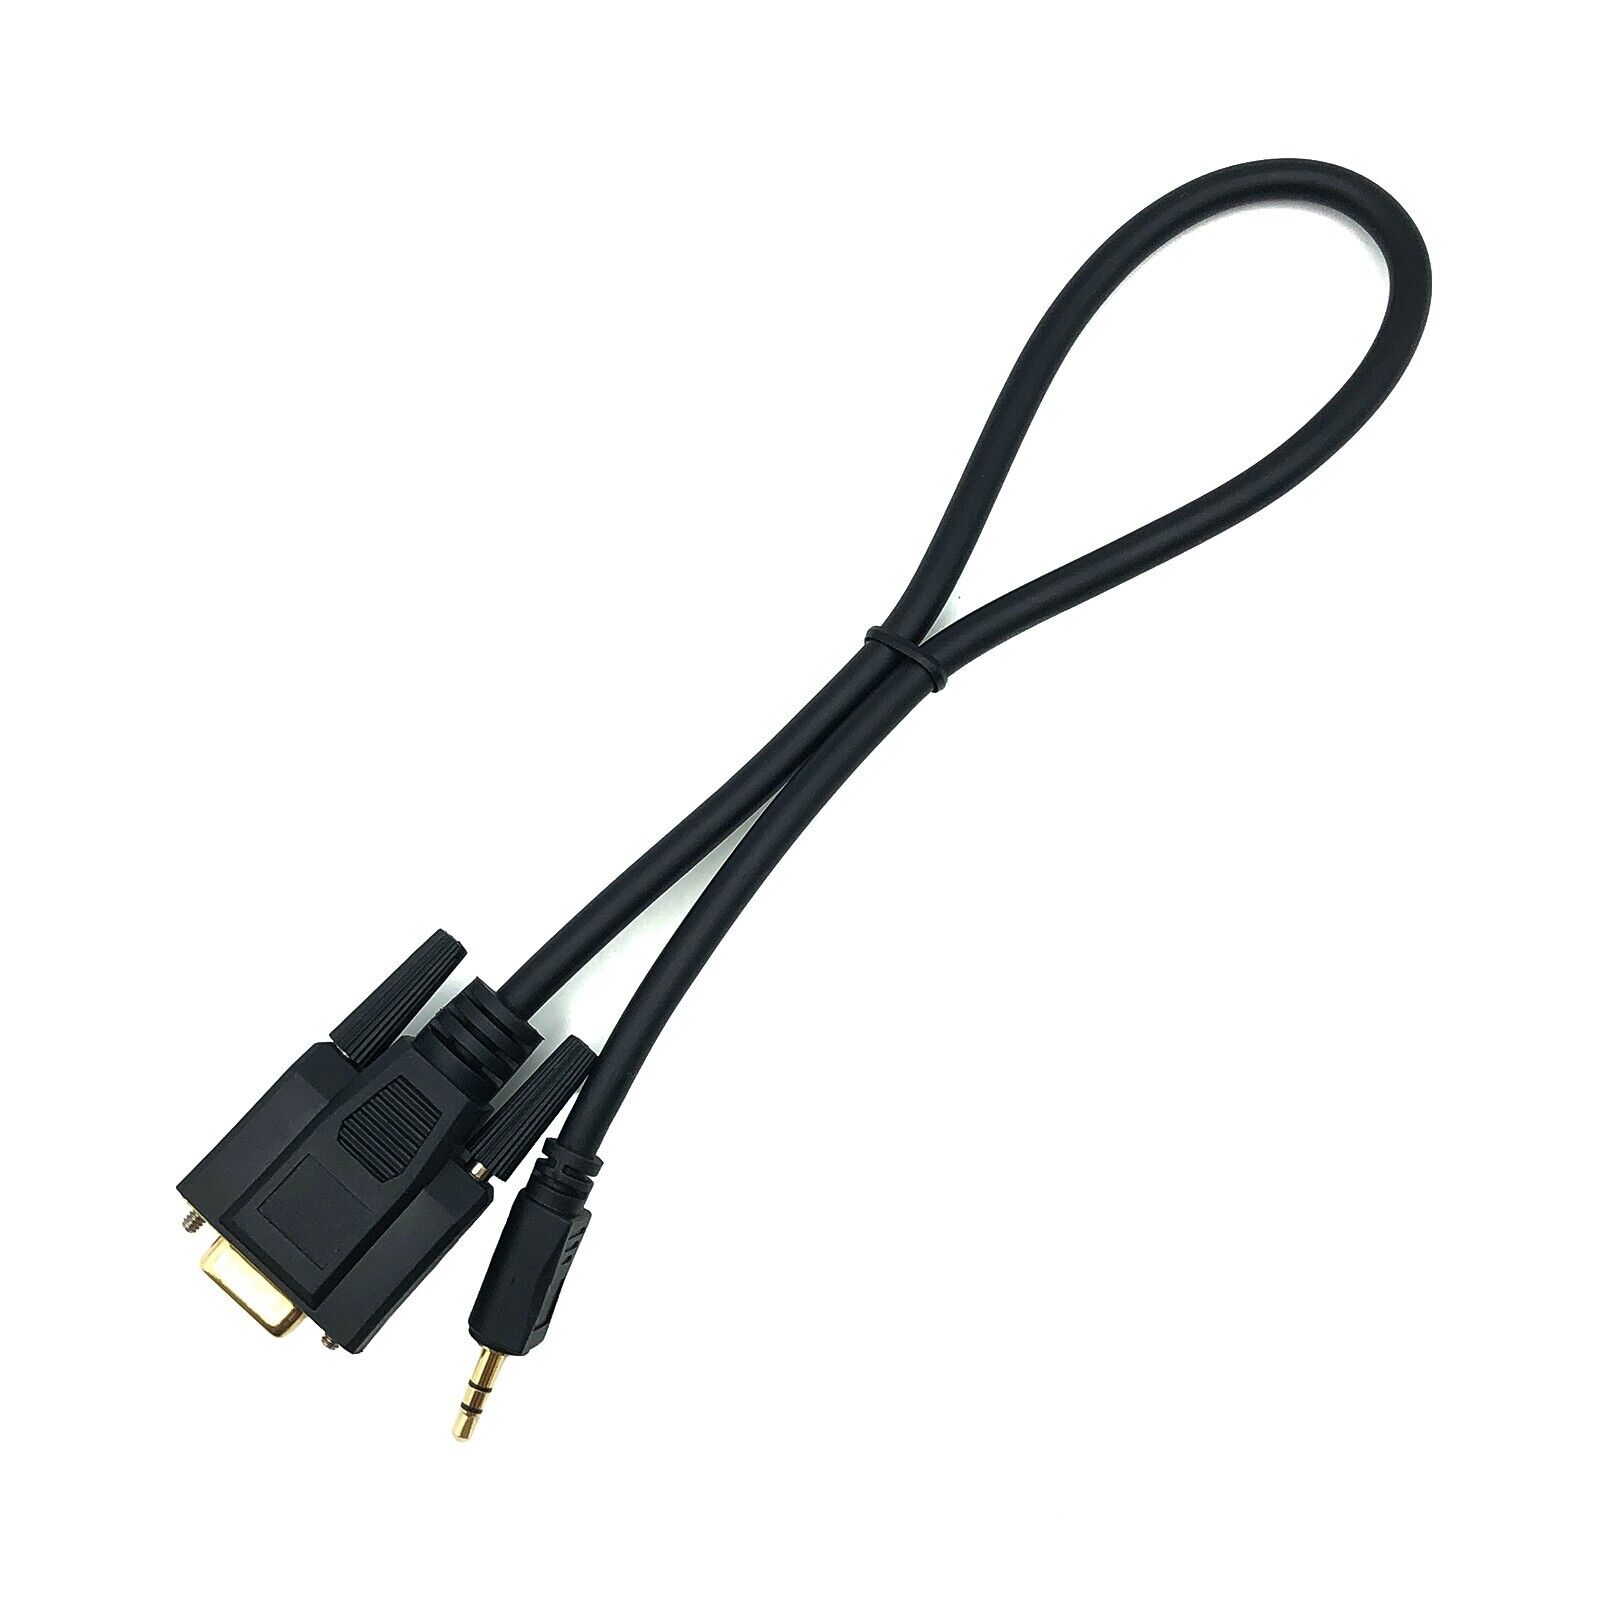 Copartner Cable E119932-U DB9 9 Pin Female to 3.5mm Jack Male